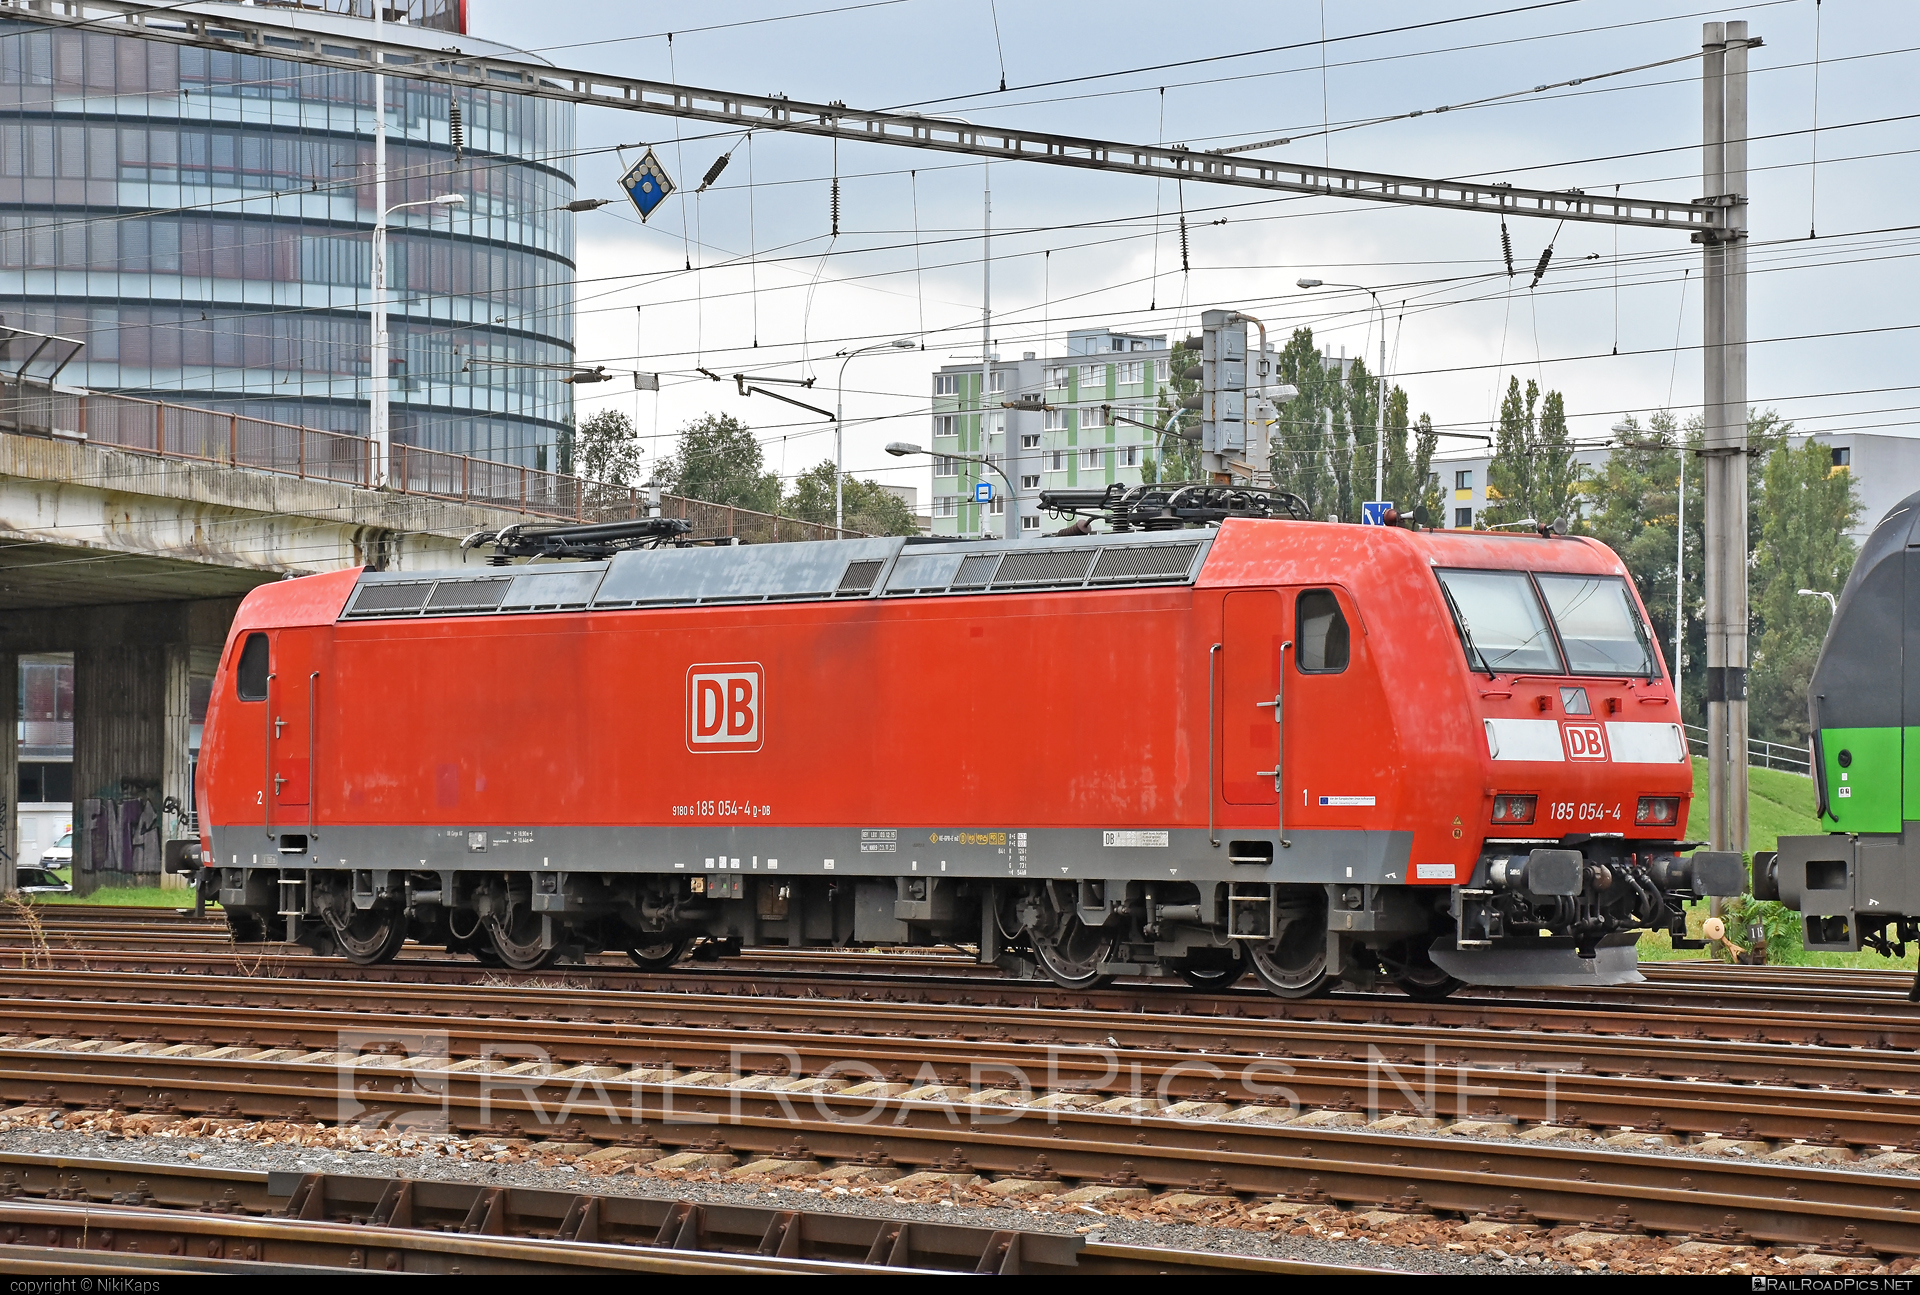 Bombardier TRAXX F140 AC1 - 185 054-4 operated by DB Cargo AG #bombardier #bombardiertraxx #db #dbcargo #dbcargoag #deutschebahn #traxx #traxxf140 #traxxf140ac #traxxf140ac1